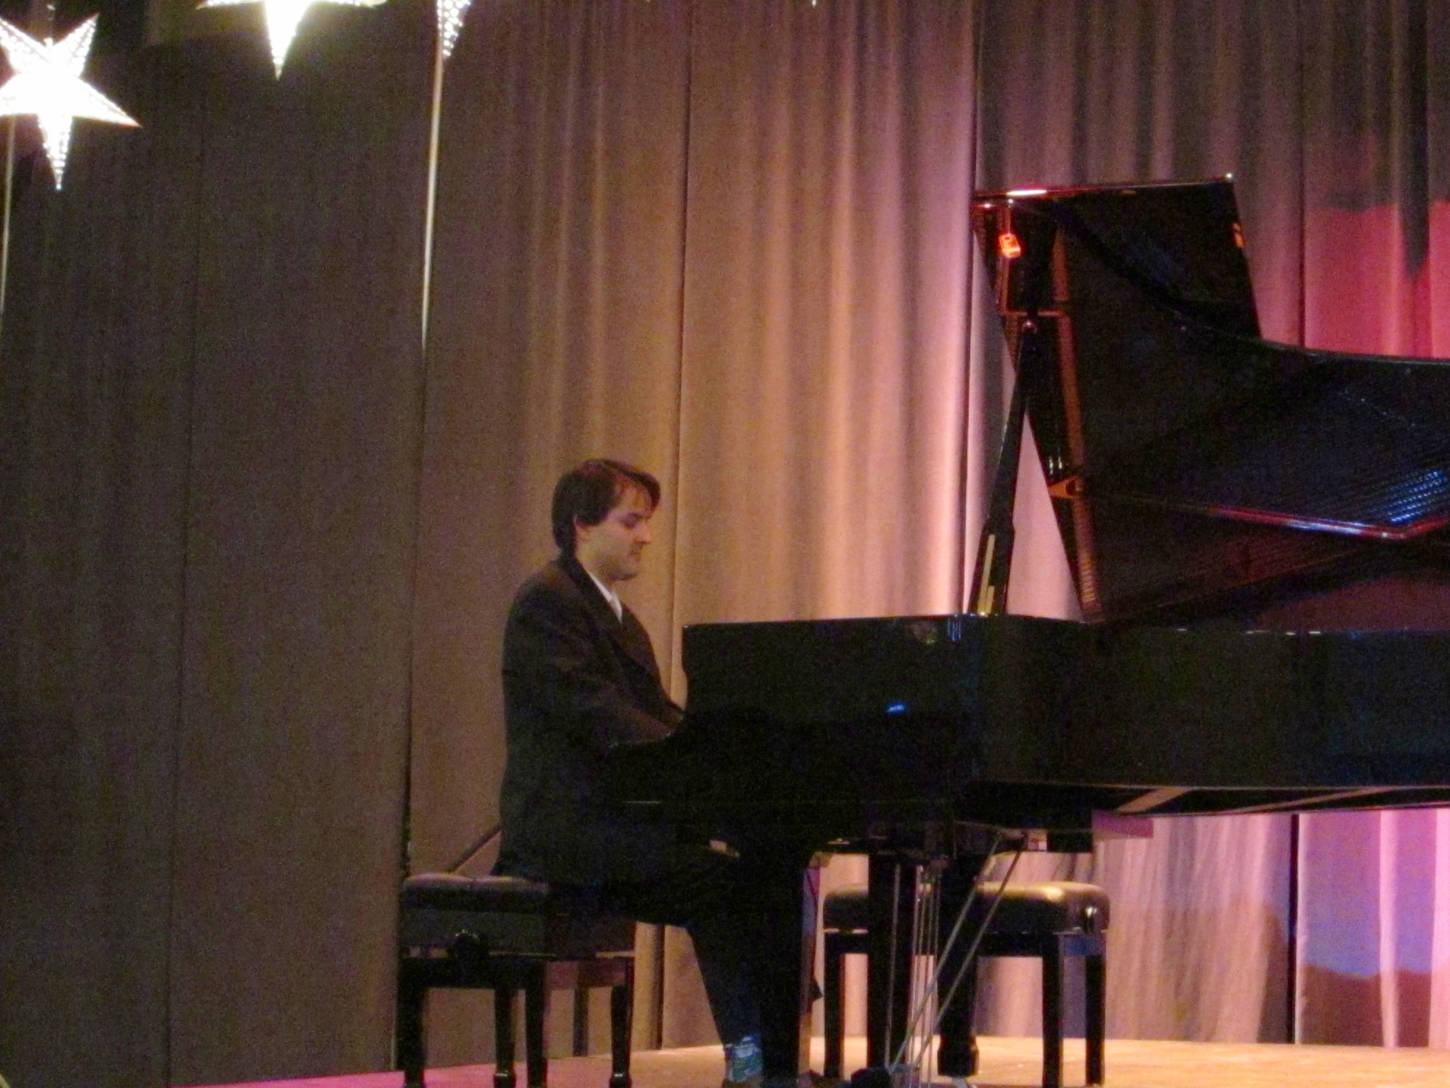 Jon Hays performs during the first recital in the Juneau Piano Series, which Hays organized. Hays said the project was devised as a showcase for piano music and the Juneau Arts & Culture Center’s piano, which was purchased last year.(Ben Hohenstatt | Capital City Weekly)